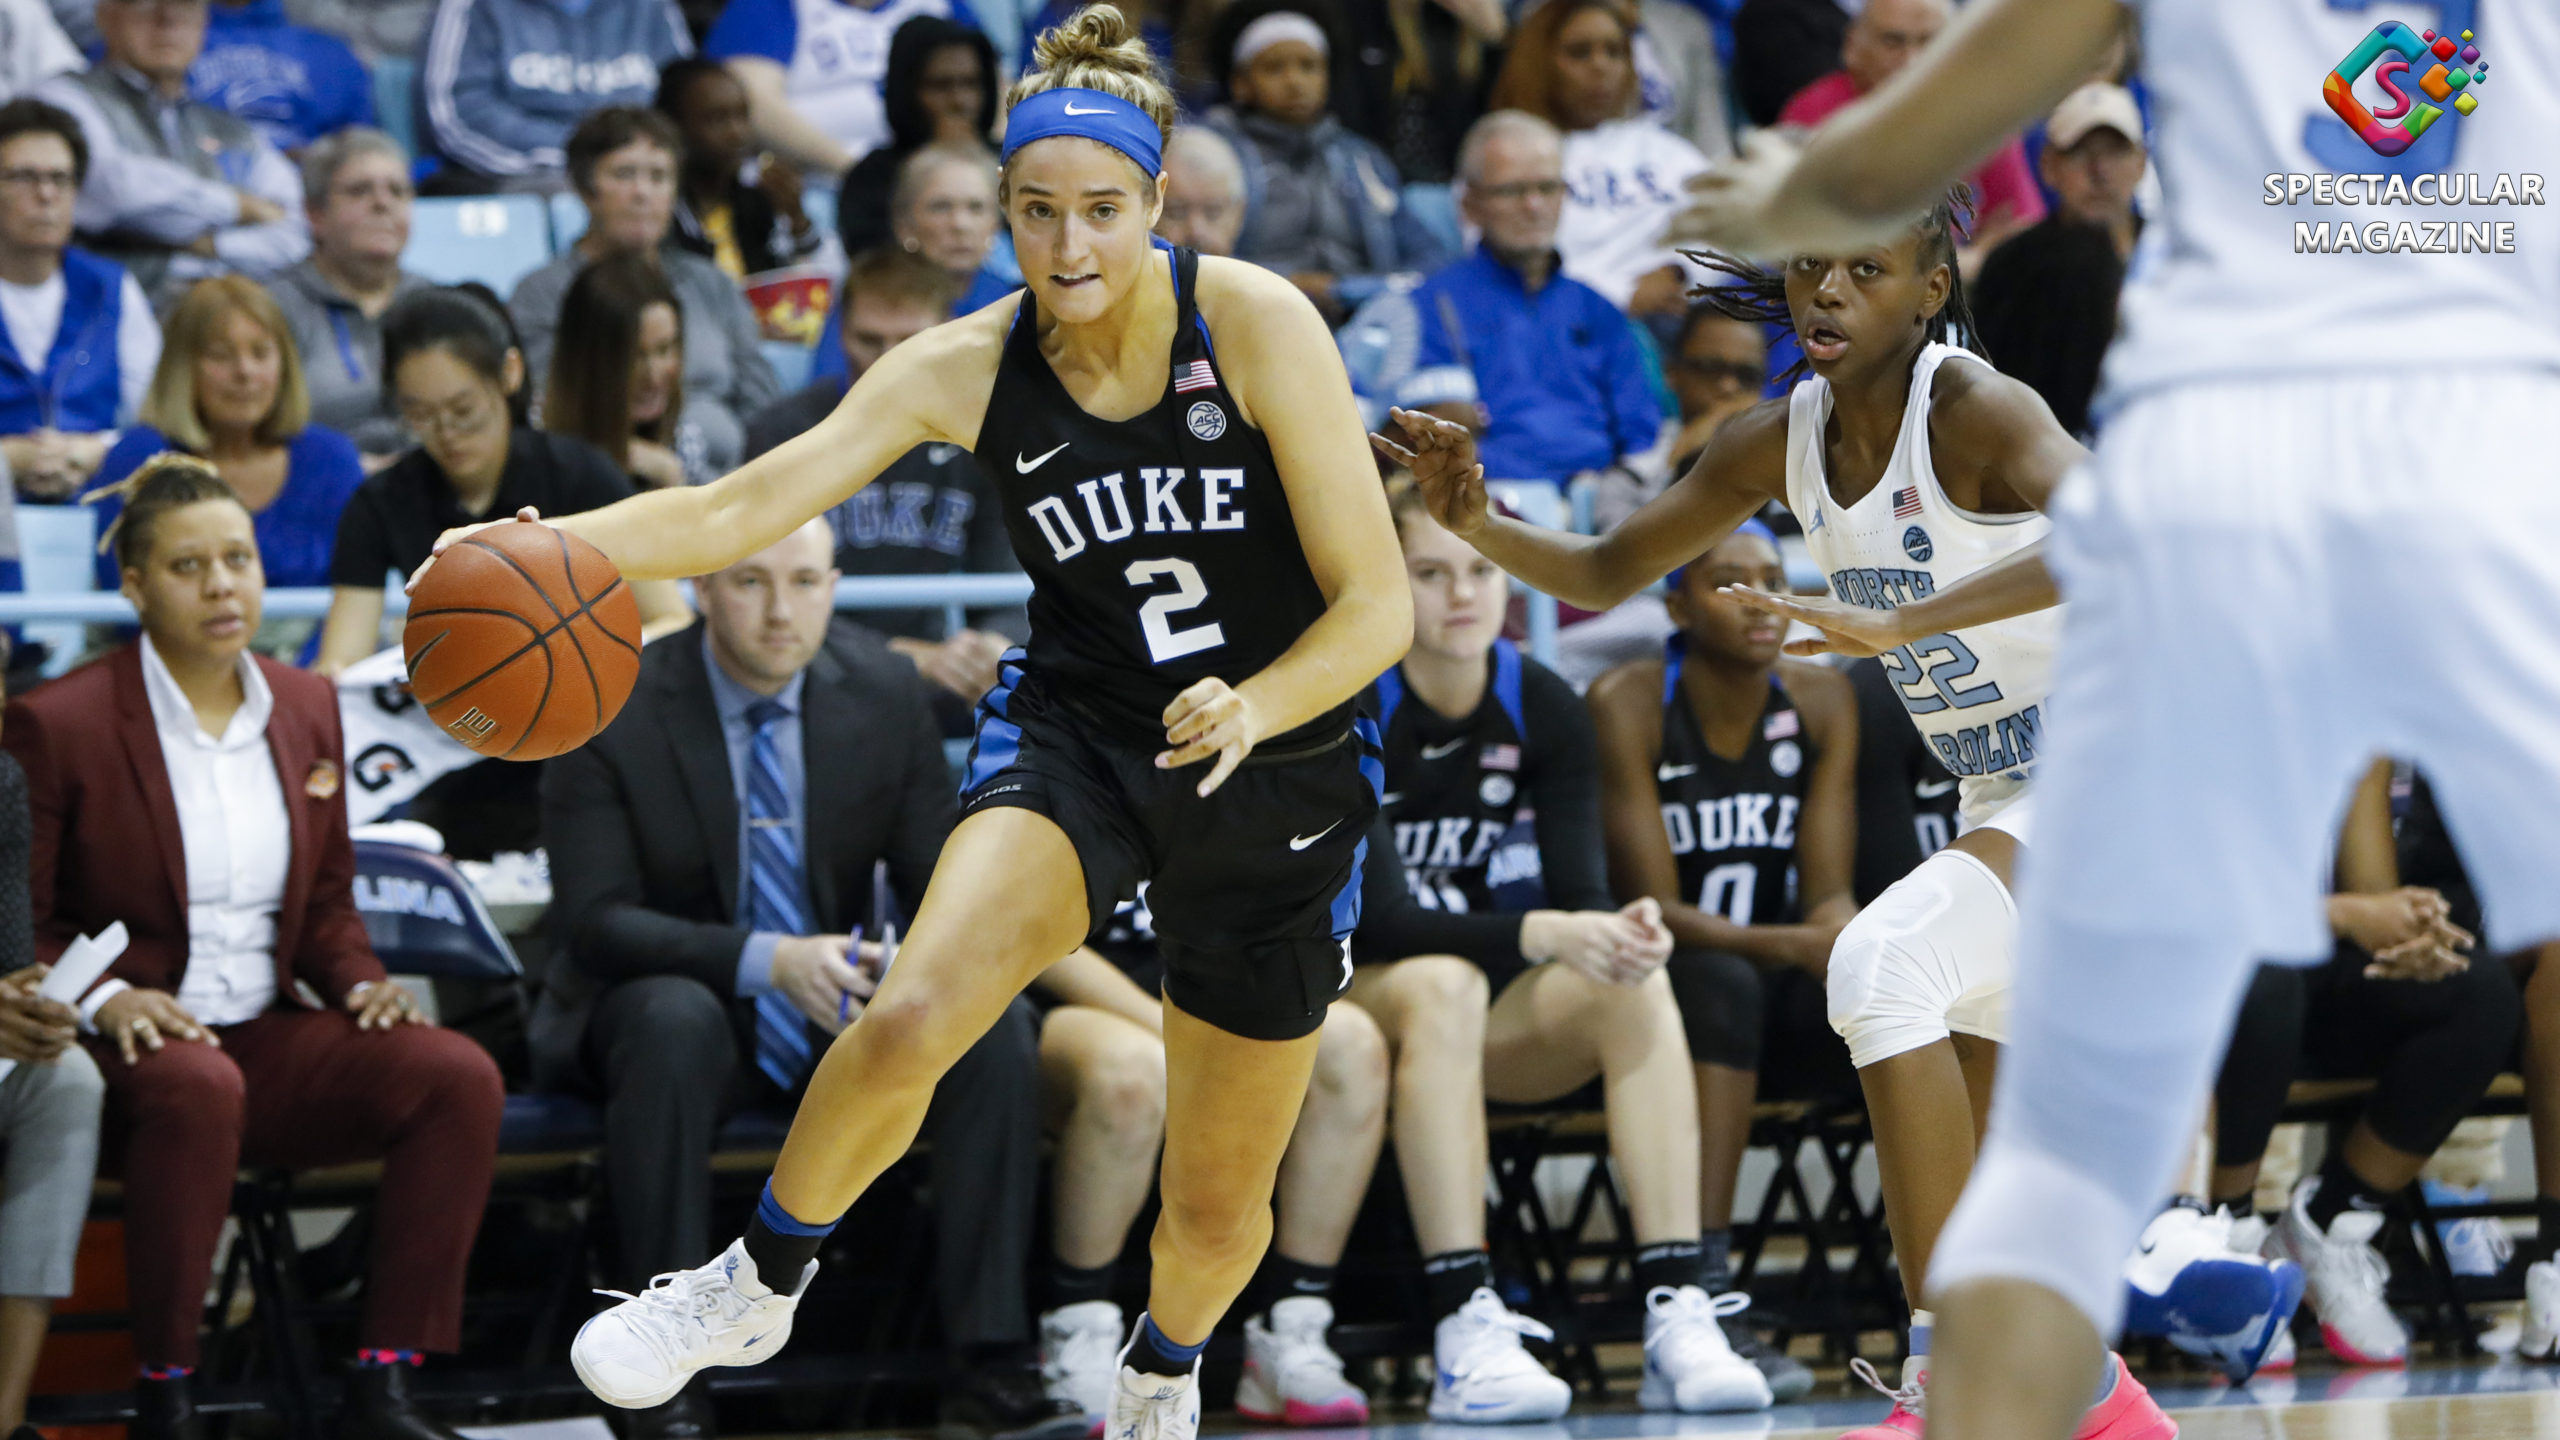 Duke's Haley Gorecki drives to the basket against North Carolina's Shayla Bennett at Carmichael Arena in Chapel Hill, N.C., Sunday, Mar. 1, 2020. Duke defeated UNC 73-54.